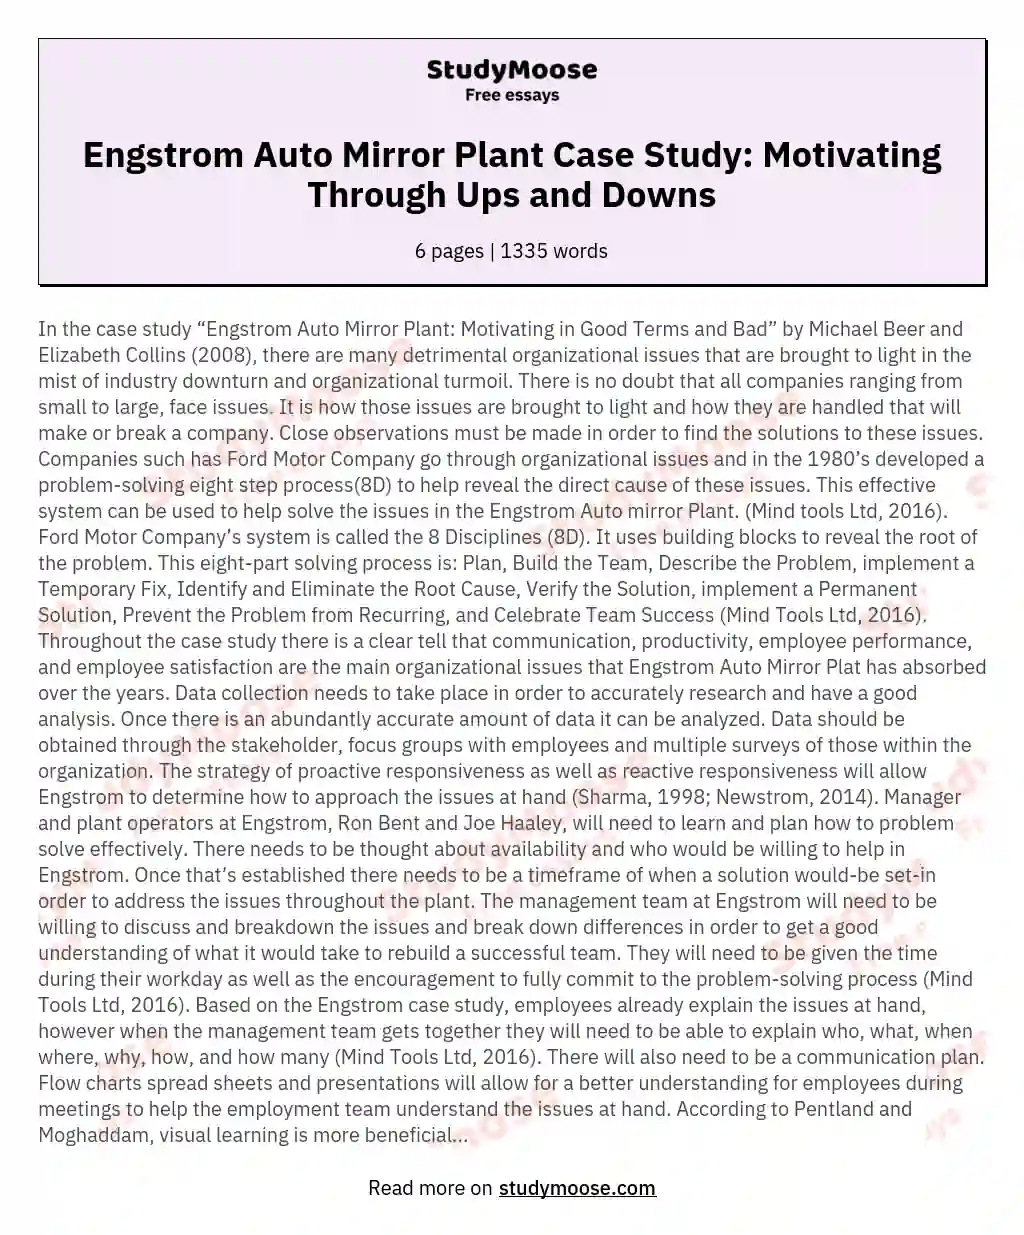 Engstrom Auto Mirror Plant Case Study: Motivating Through Ups and Downs